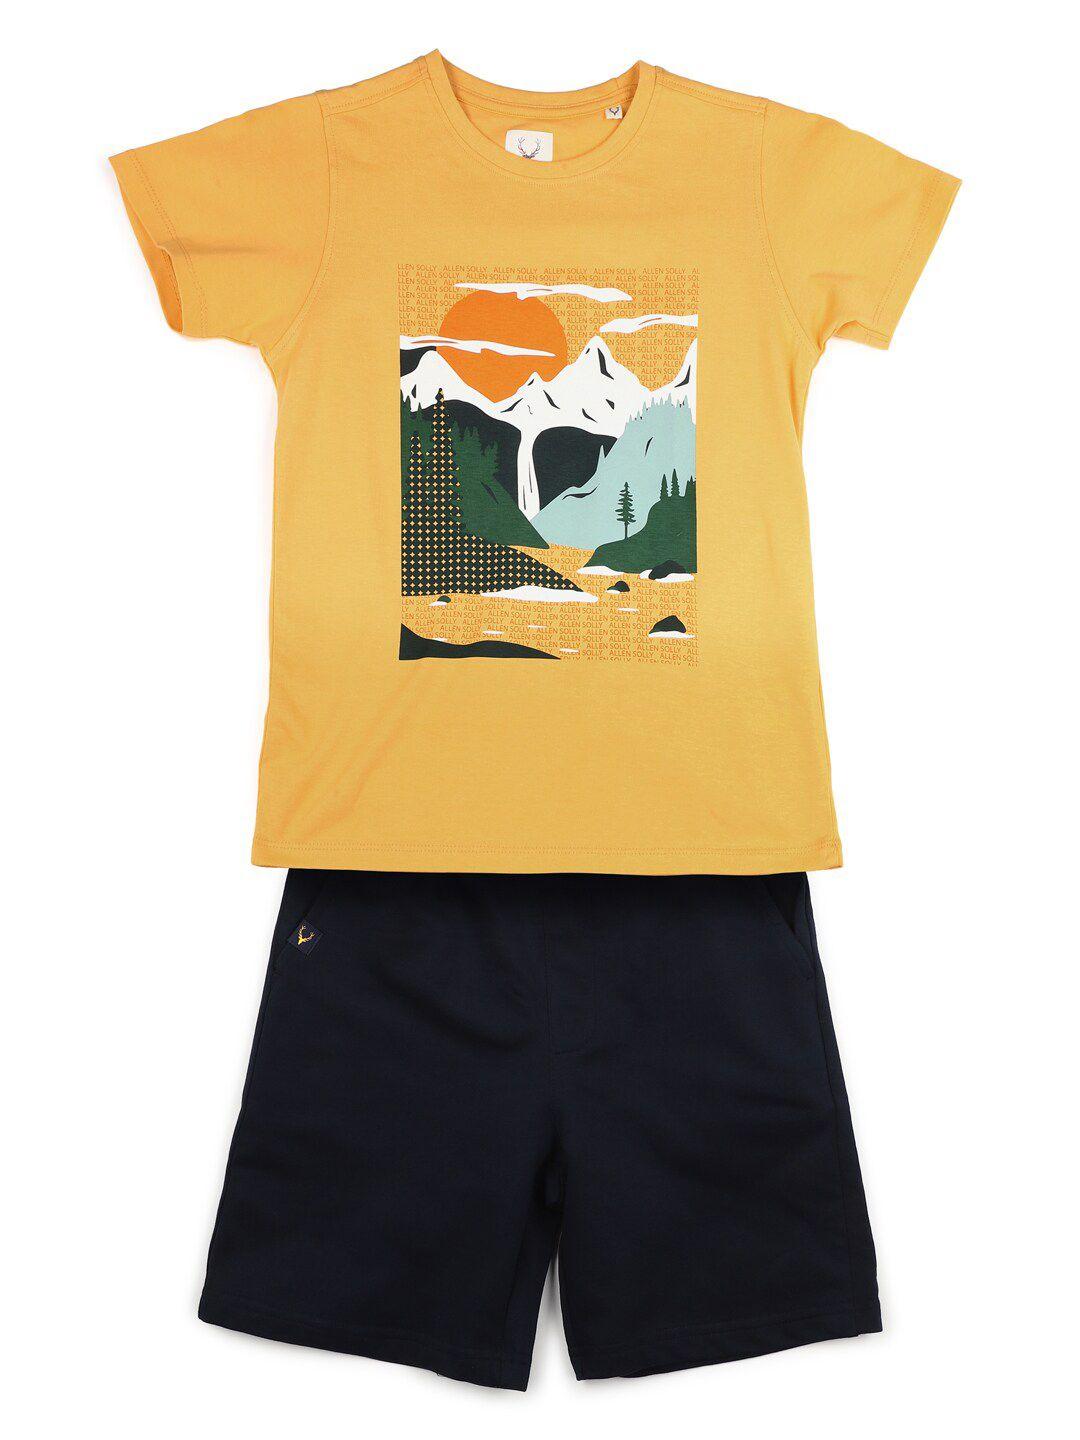 allen solly junior boys yellow & black printed cotton t-shirt with shorts